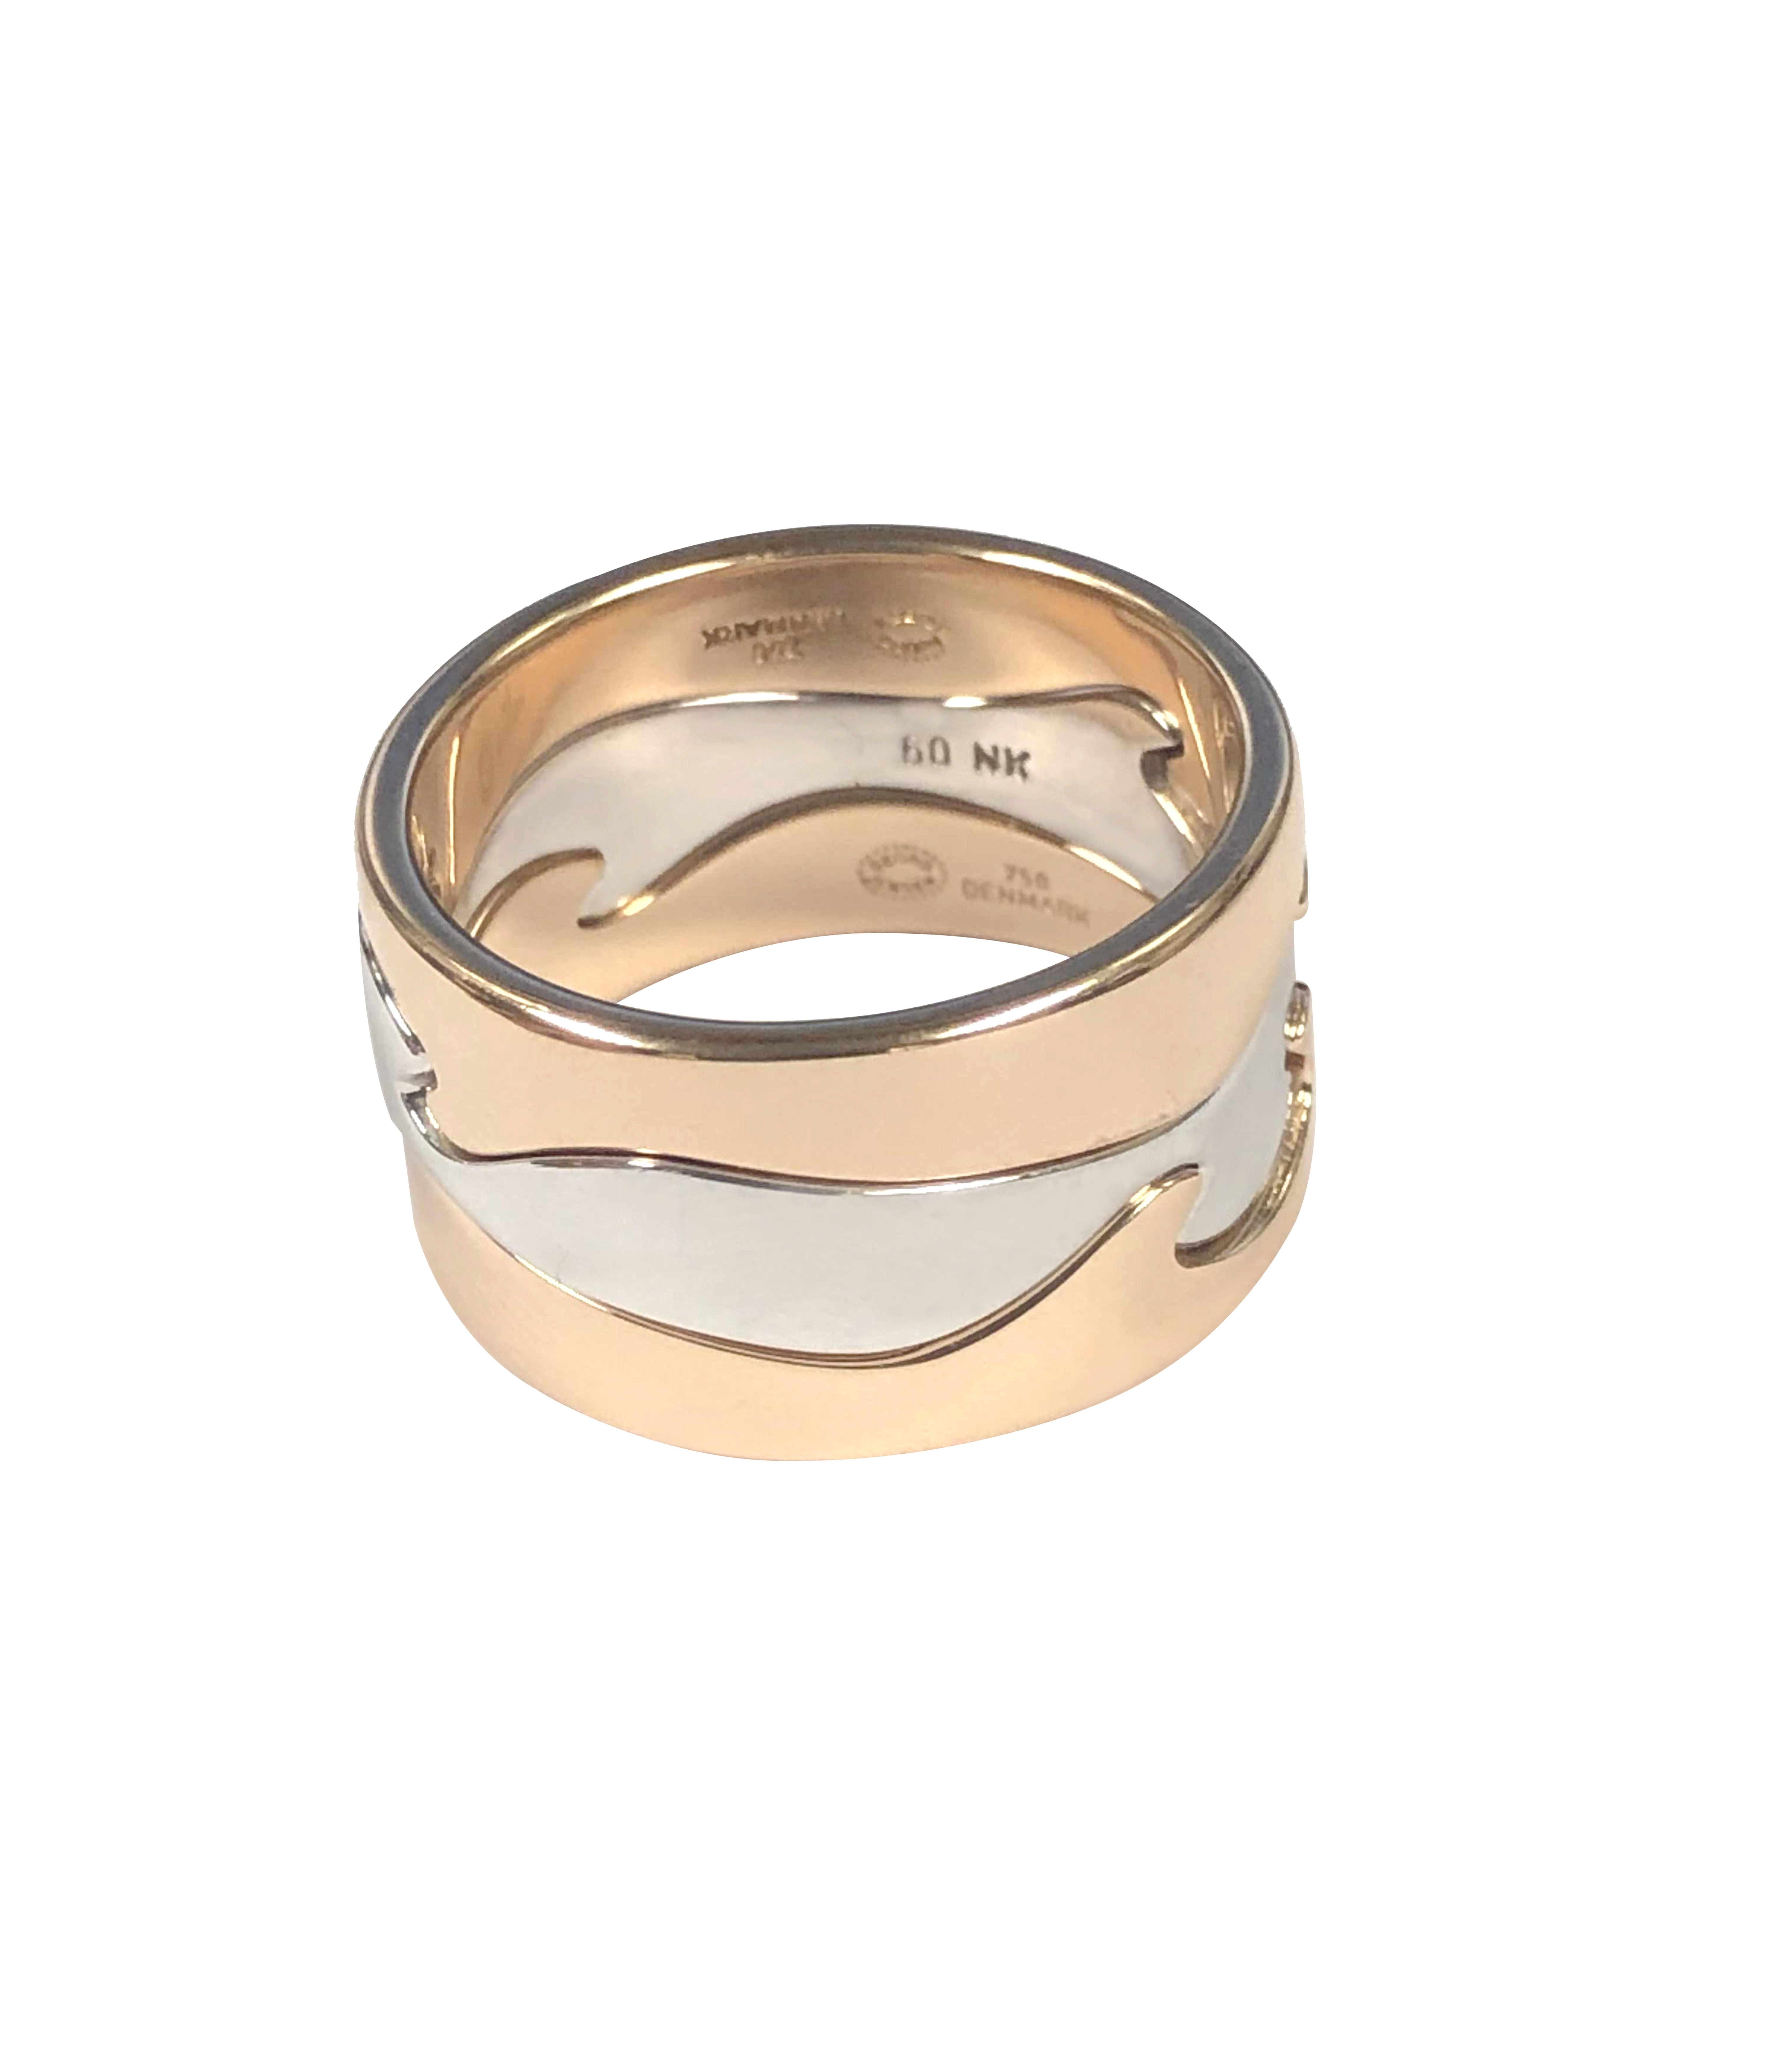 Circa 2000 Georg Jensen Fusion, Puzzle Ring by Nina Koppel, comprised of two 18K Rose Gold bands on either side of a center White Gold band each in a Puzzle design that perfectly fit together. Measuring 1/2 inch wide and 1.5 M.M. thick. Finger size